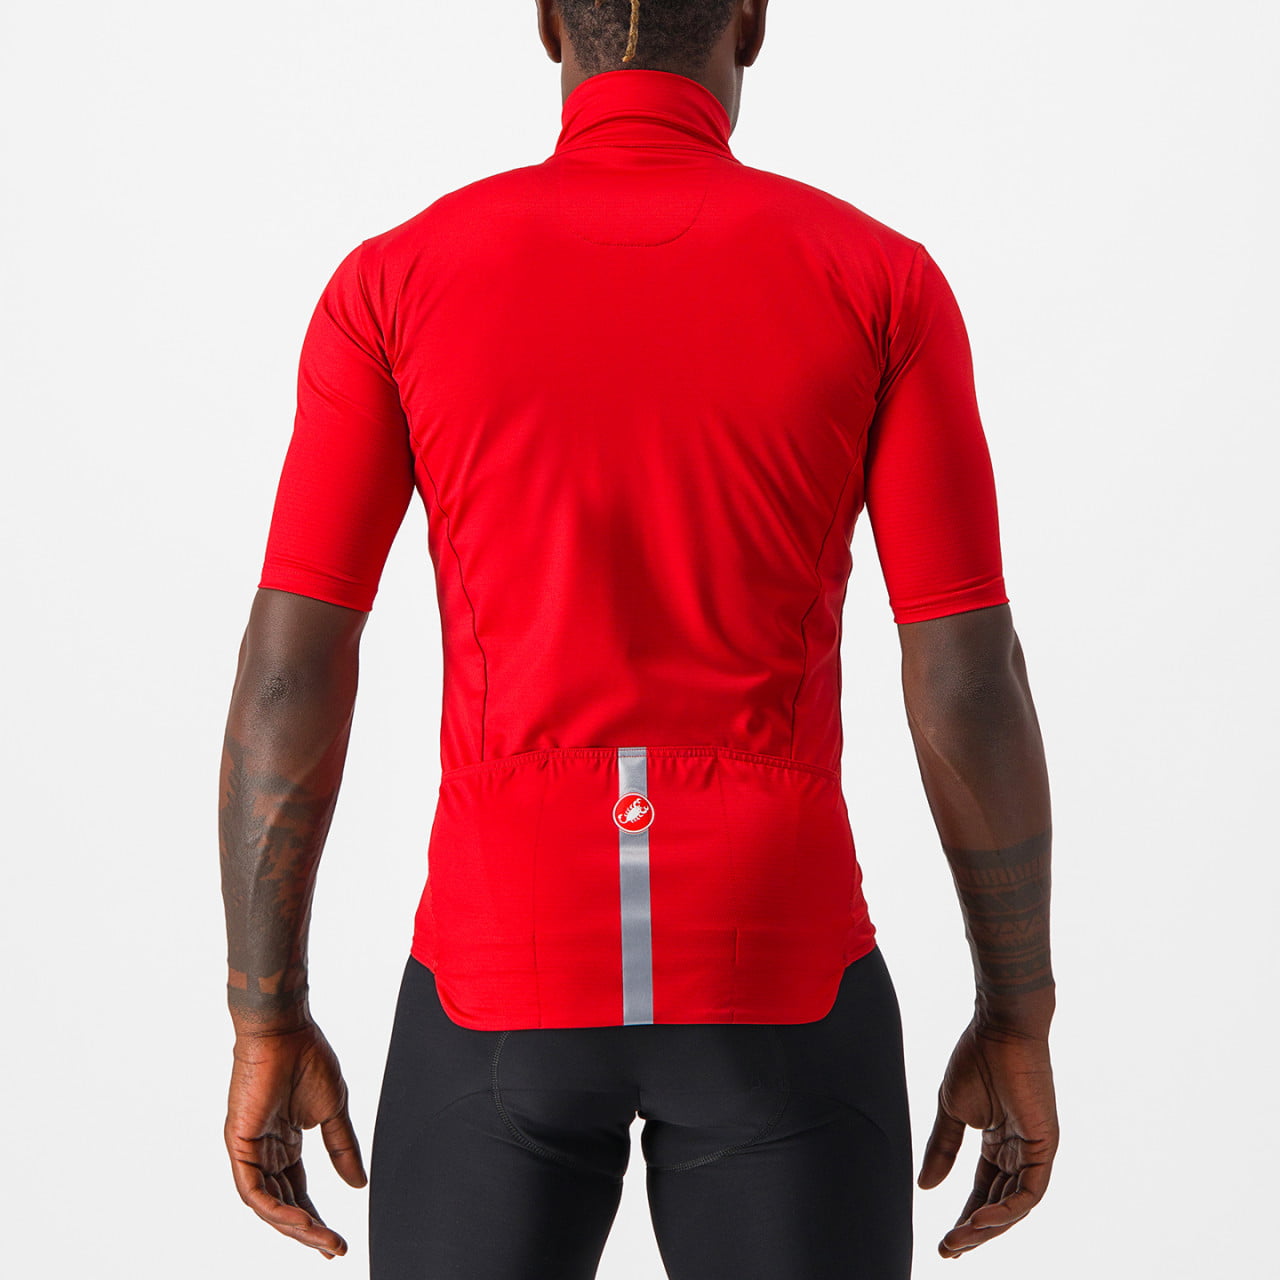 Pro Thermal Mid short-sleeved jersey